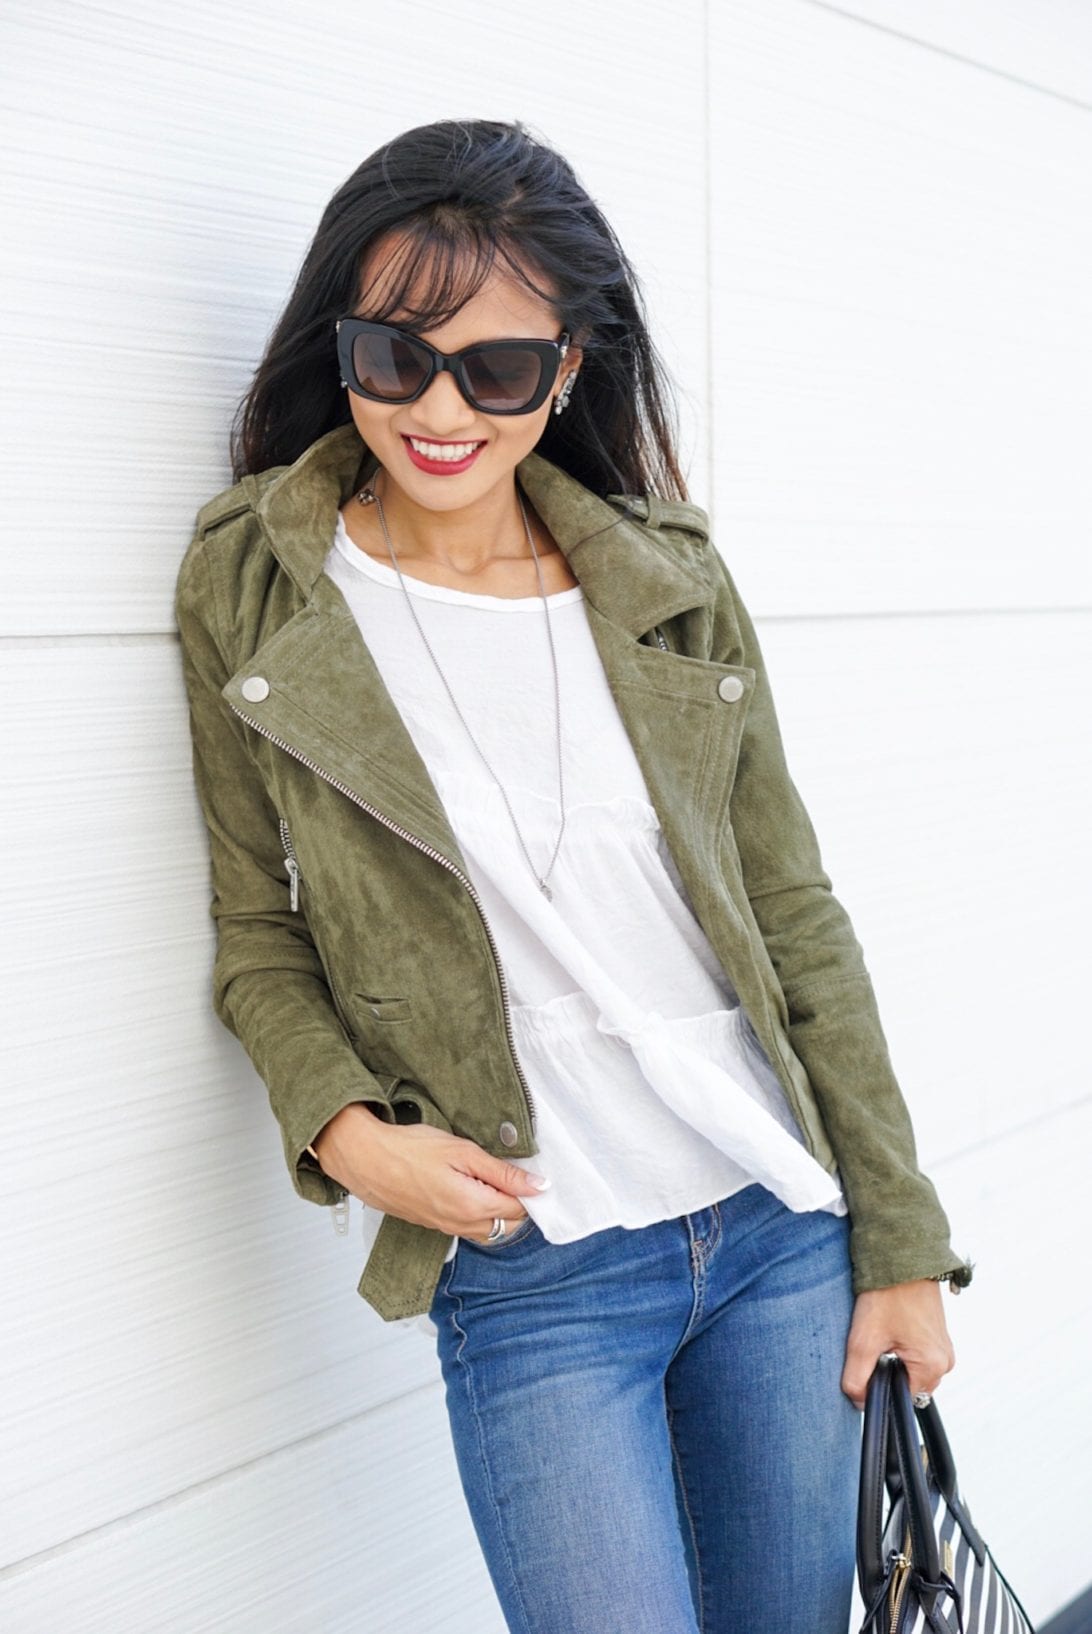 blank NYC, suede jacket, olive jacket, peplum top, Kate spade purse, skinny jeans, fall outfit, Versace sunglasses, open toe booties, NYC, NYFW, NYFW schedule 